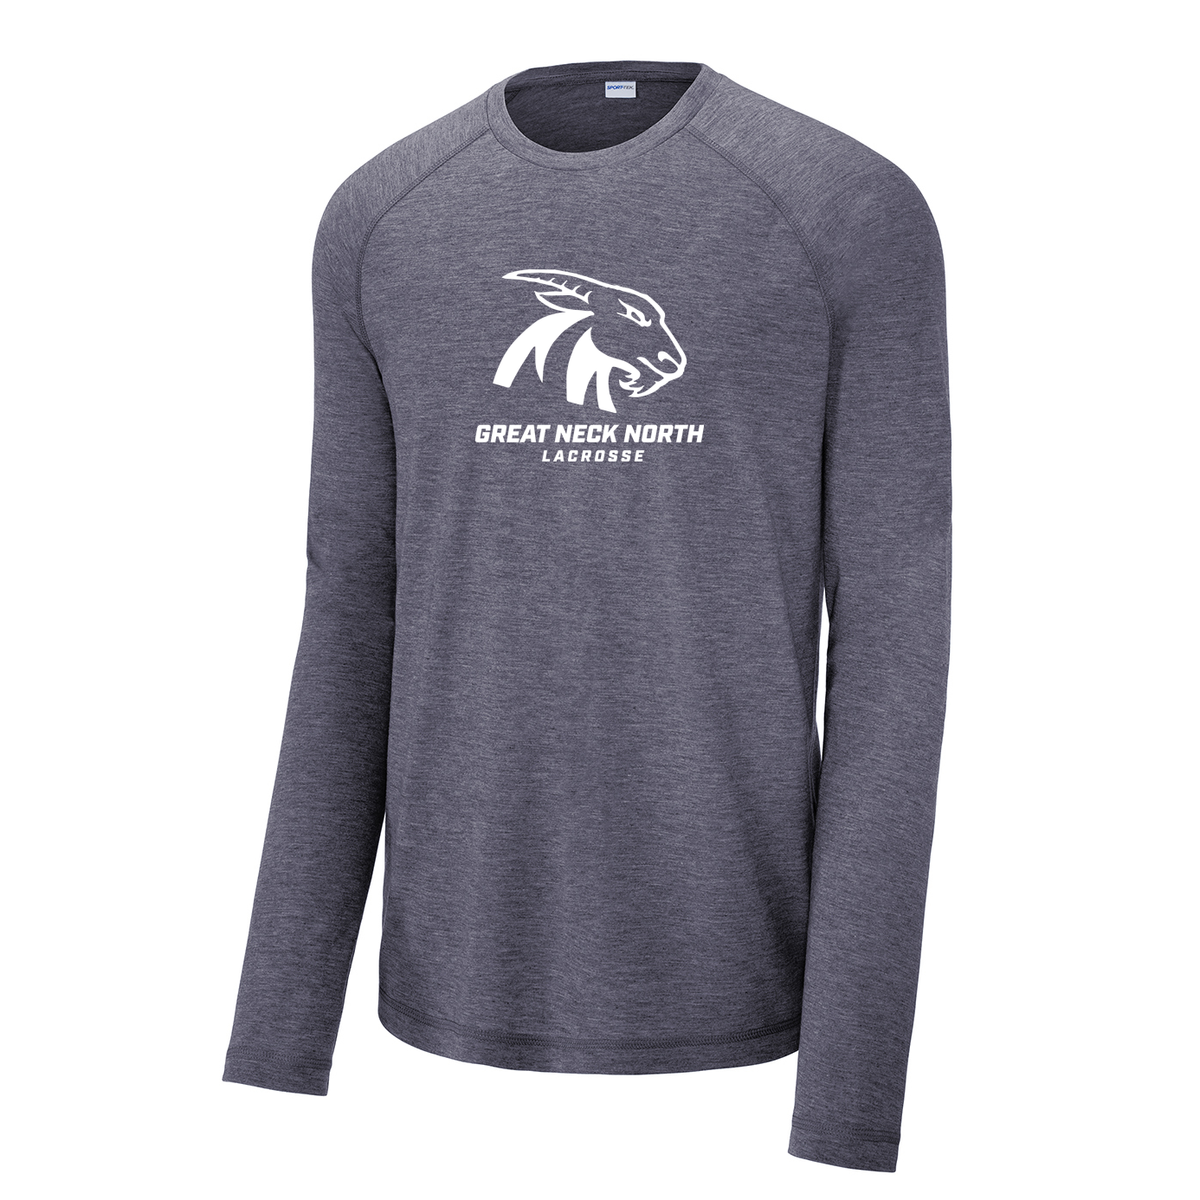 Great Neck North HS Lacrosse Long Sleeve Raglan CottonTouch